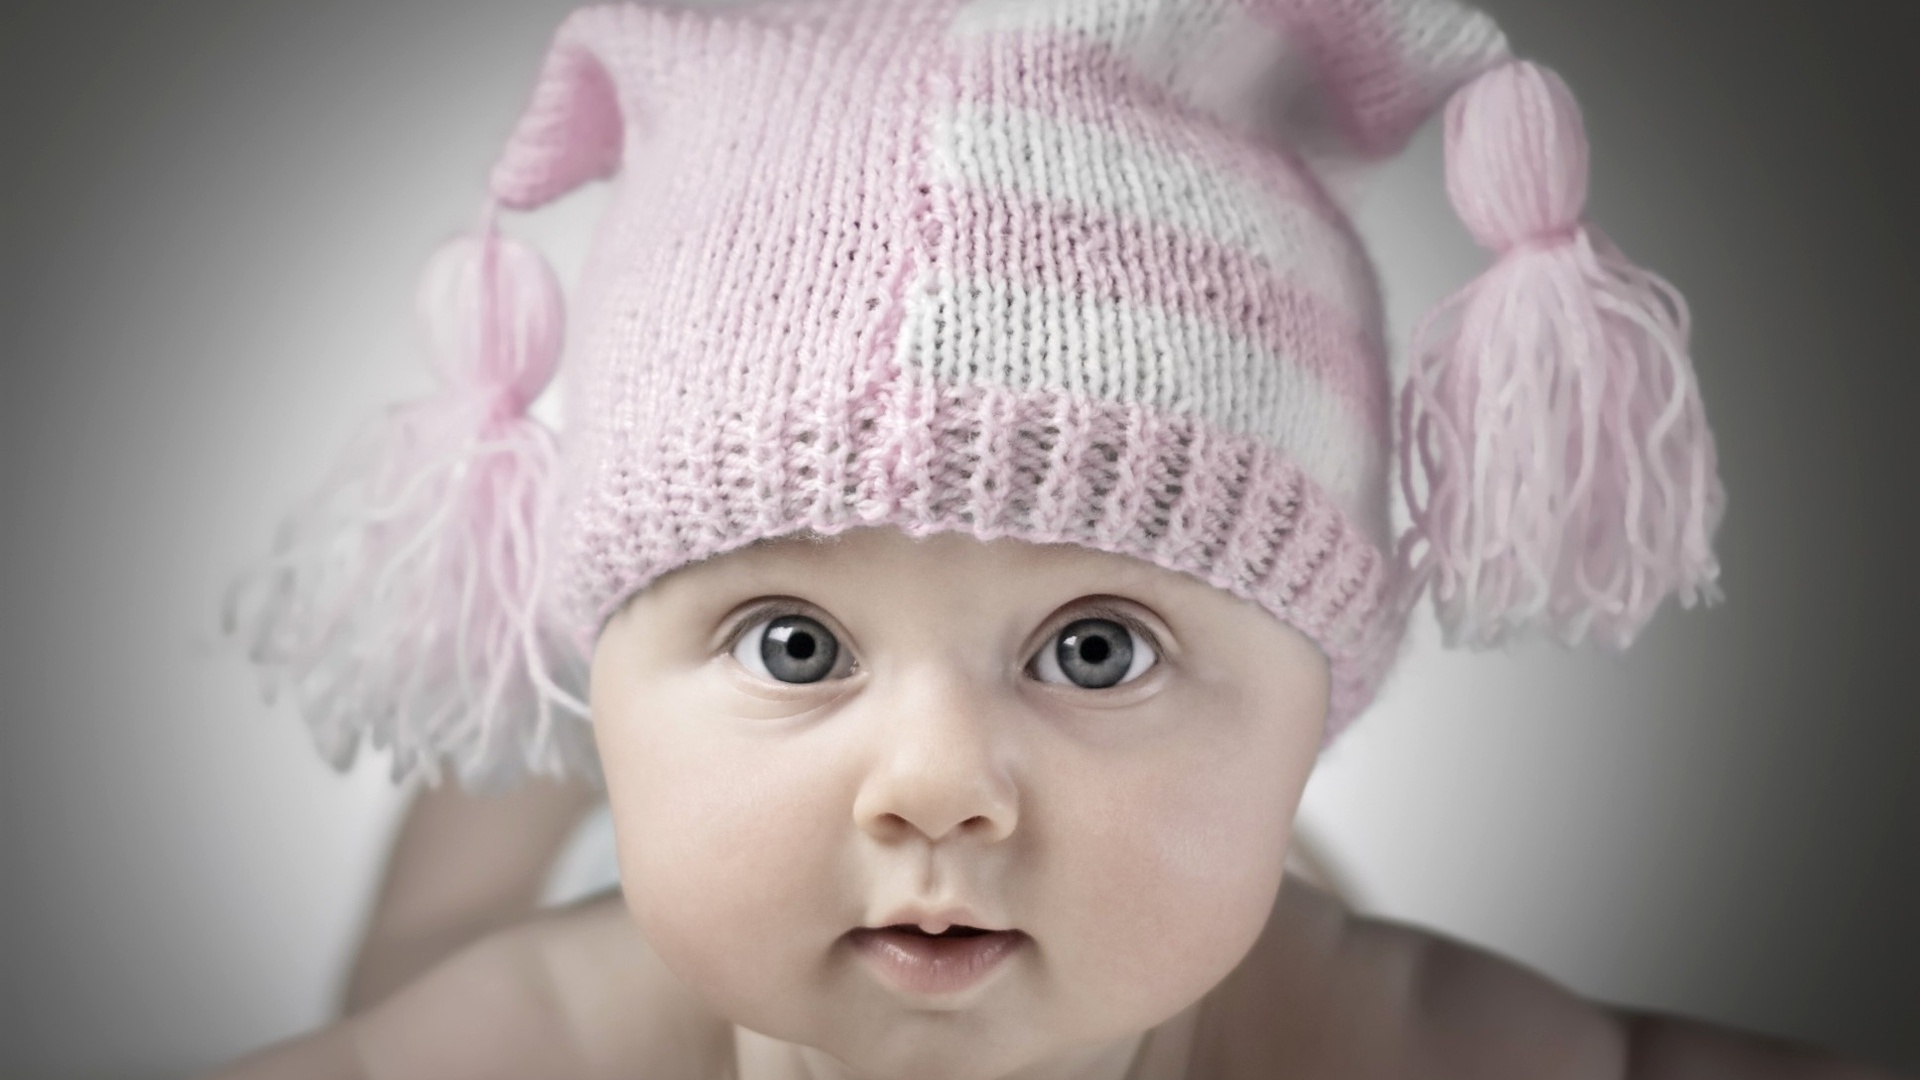 Cute Baby Wallpaper Pictures Image